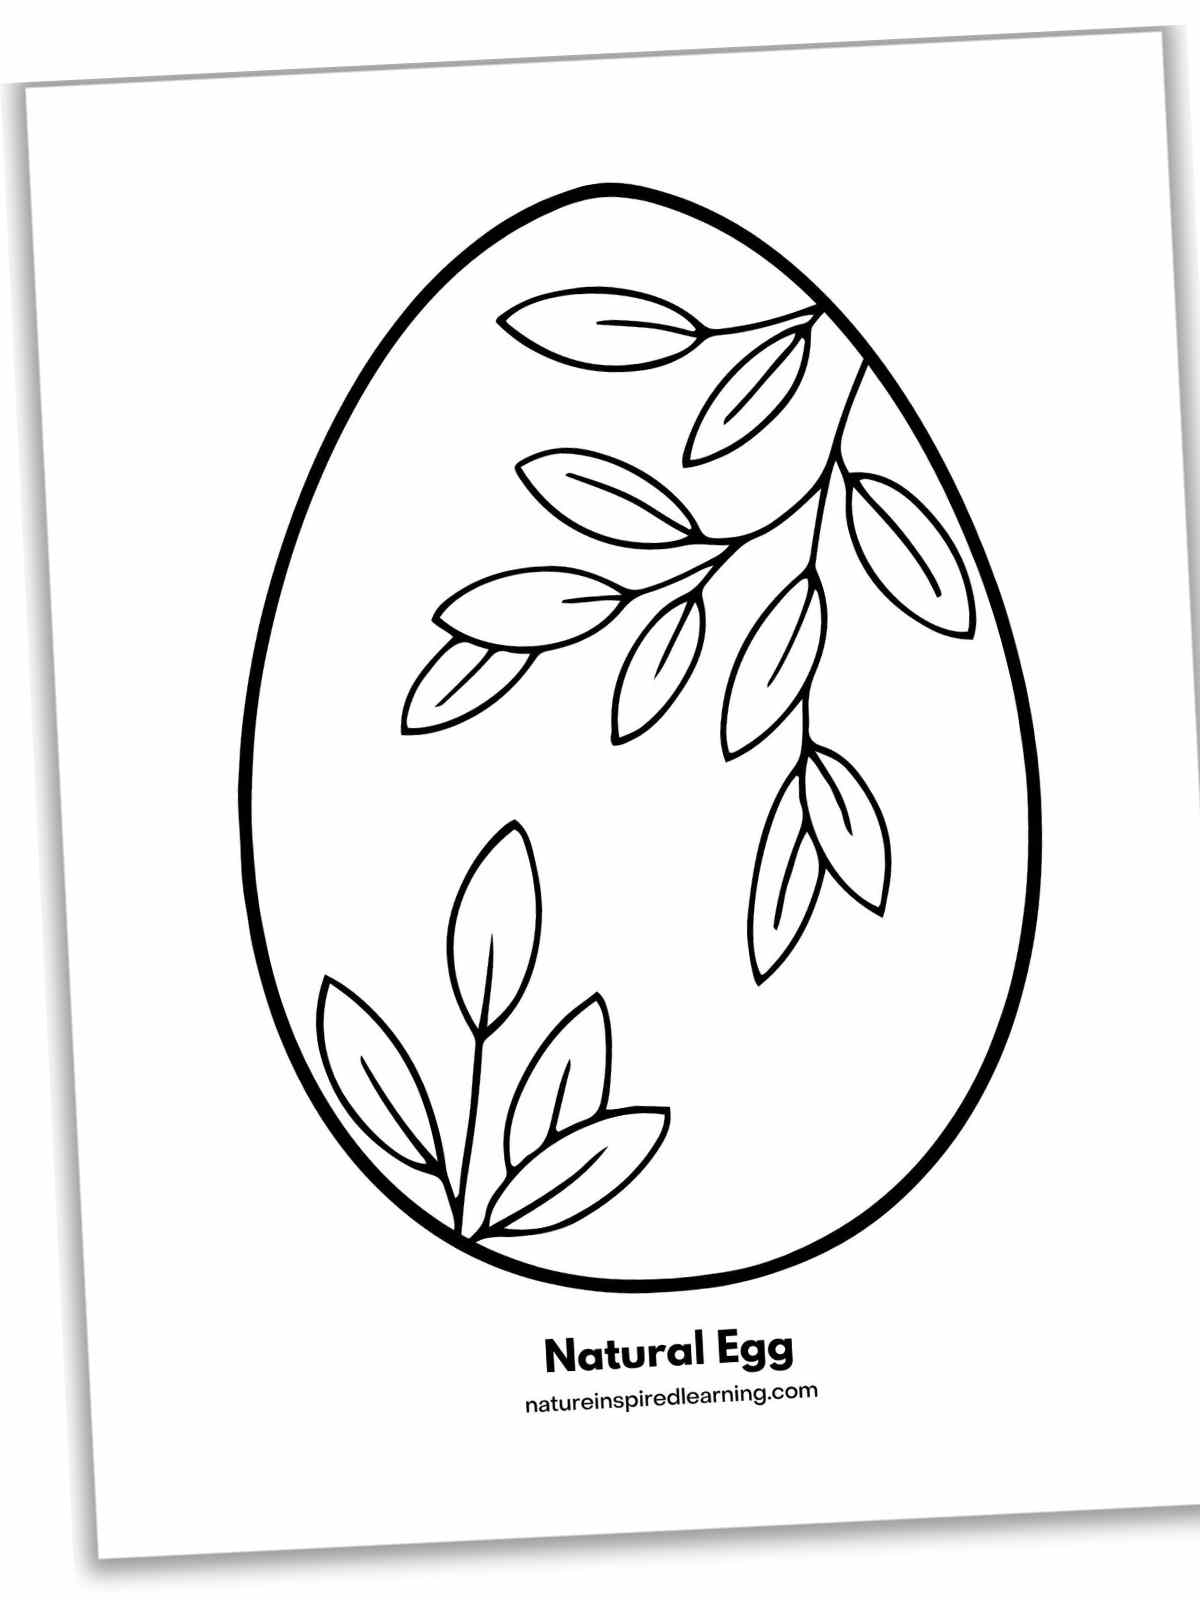 Large outline of an egg with leaf designs on the egg